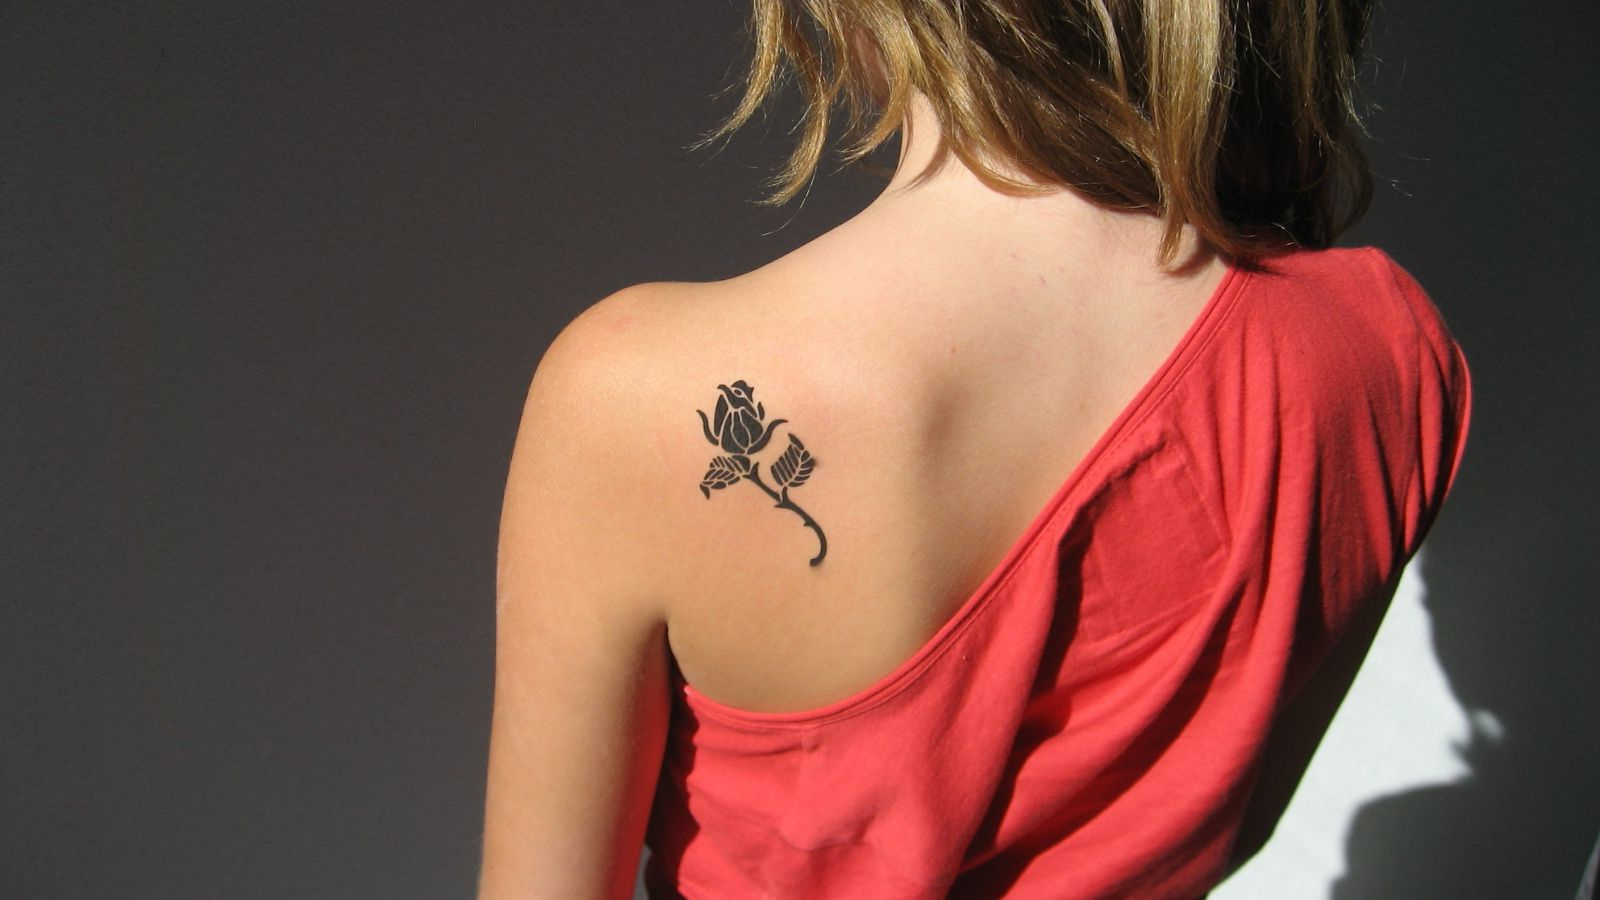 Girl Tattoos On Shoulder Blade 30 Small Cute Tattoos For Girls with regard to dimensions 1600 X 900